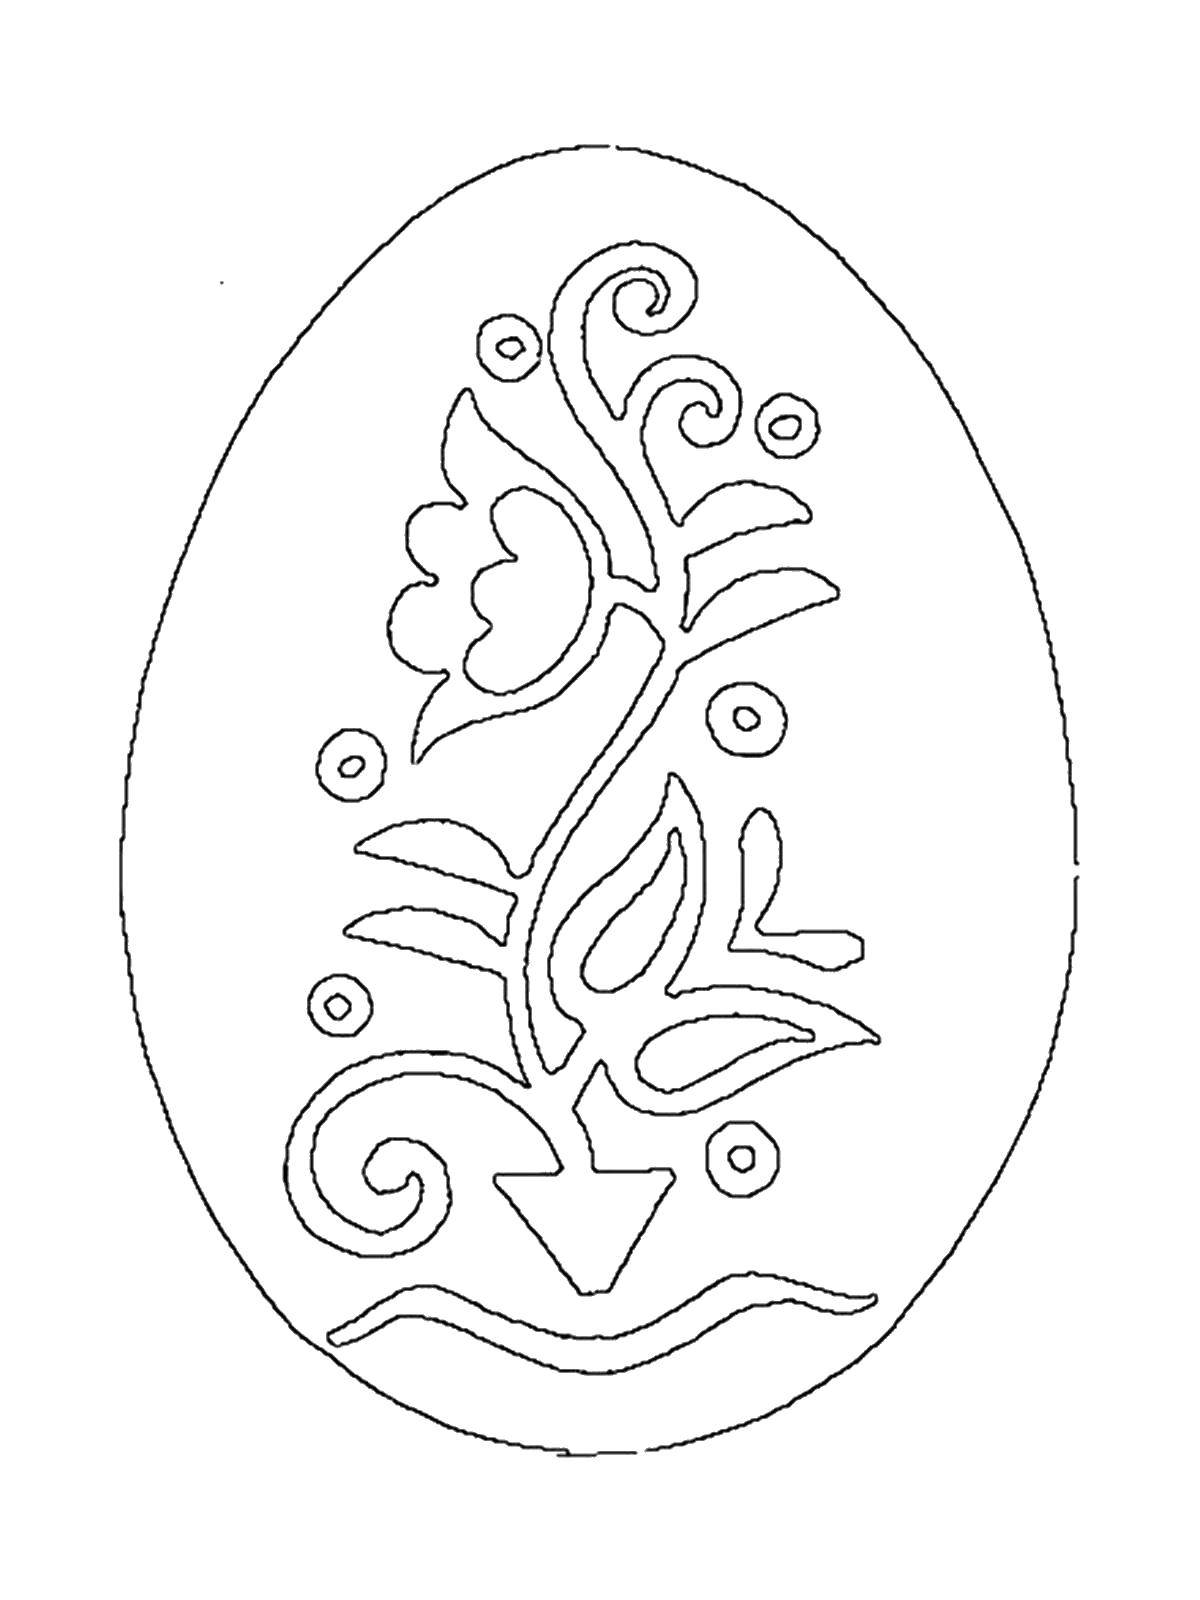 Coloring The flowers on the egg. Category coloring Easter. Tags:  Easter, eggs, patterns.